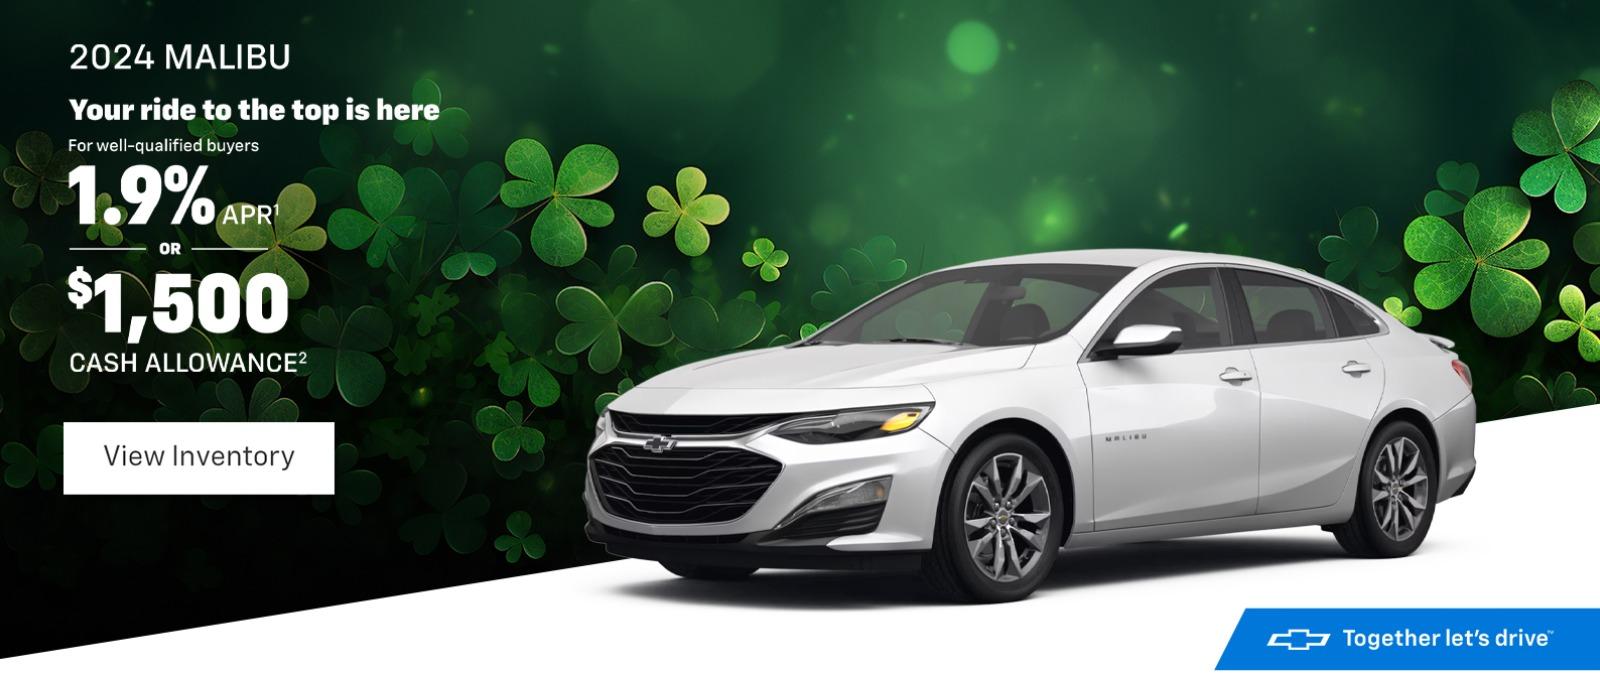 2024 MALIBU Your ride to the top is here For well-qualified buyers 1.9% APR OR $1,500 CASH ALLOWANCE²